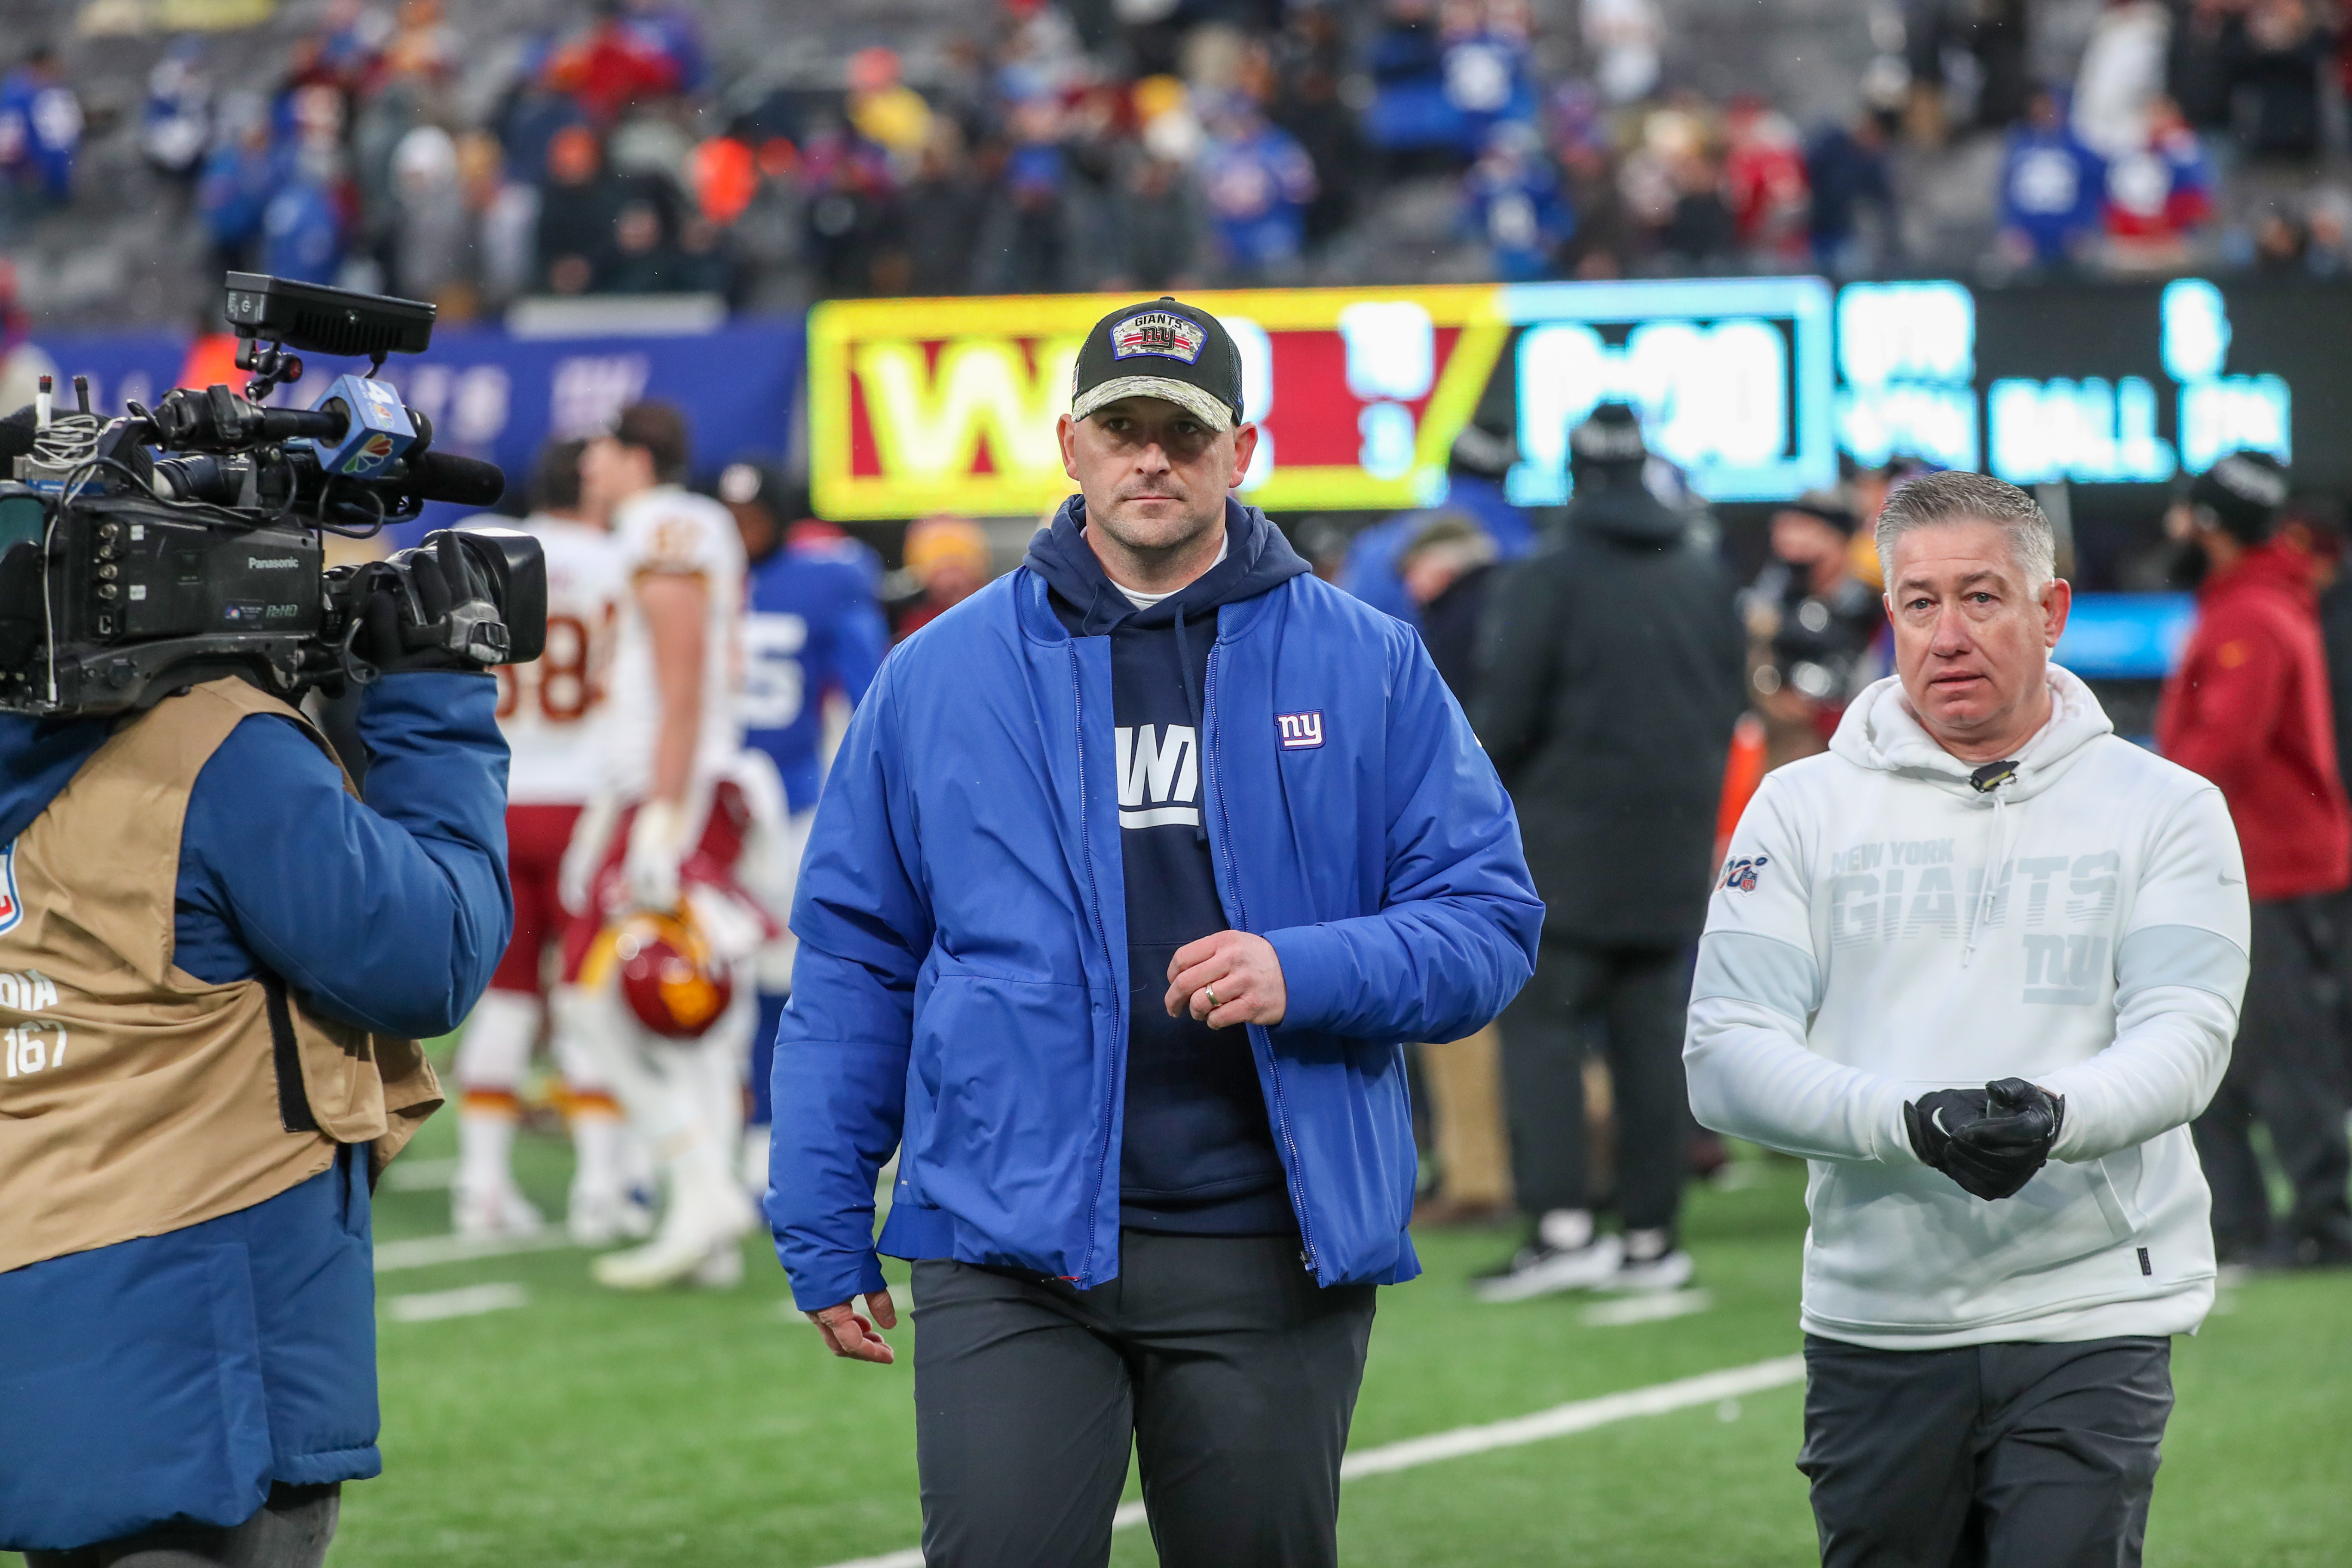 New York Giants head coach Joe Judge (center) walks off after the Giants lost to the Washington Football Team, 22-7, on Sunday, Jan. 9, 2022 in East Rutherford, N.J.